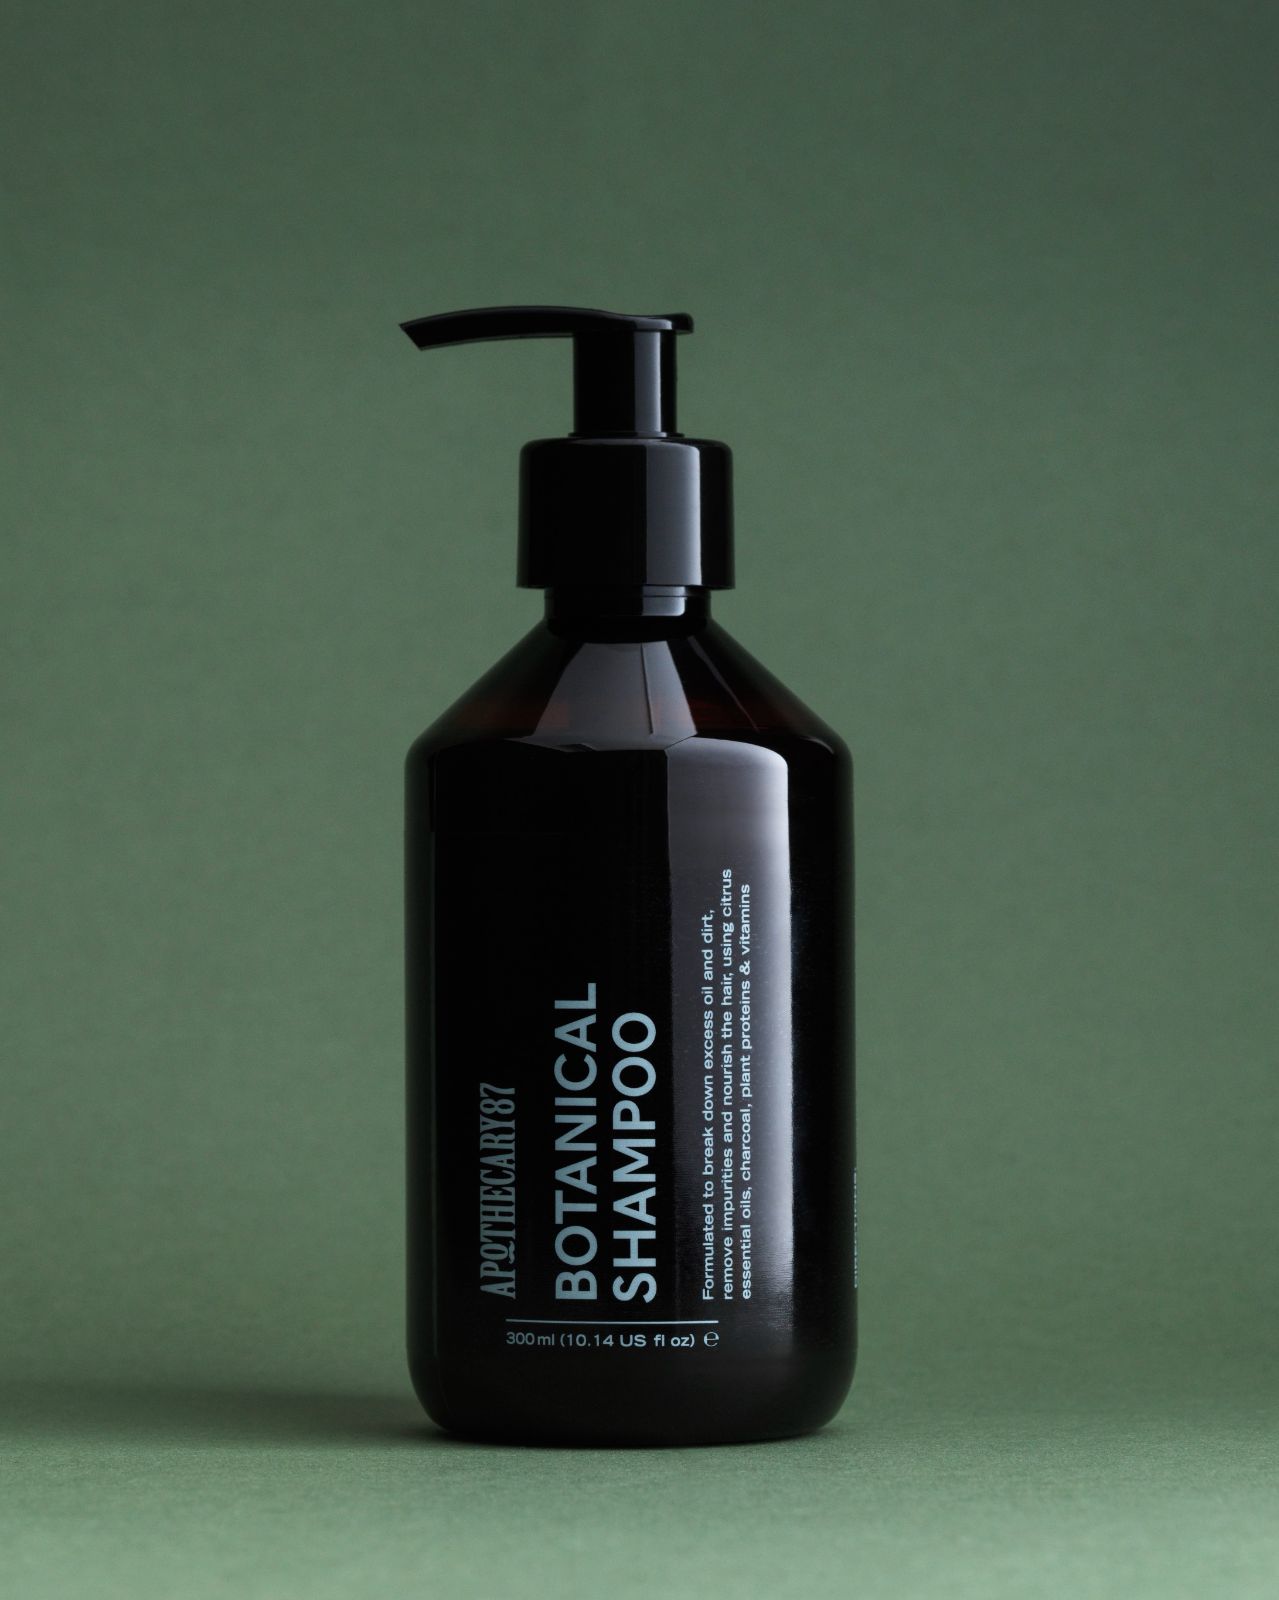 A brown pump bottle of Apothecary87 BOTANICAL SHAMPOO on green warmly-lit studio background.